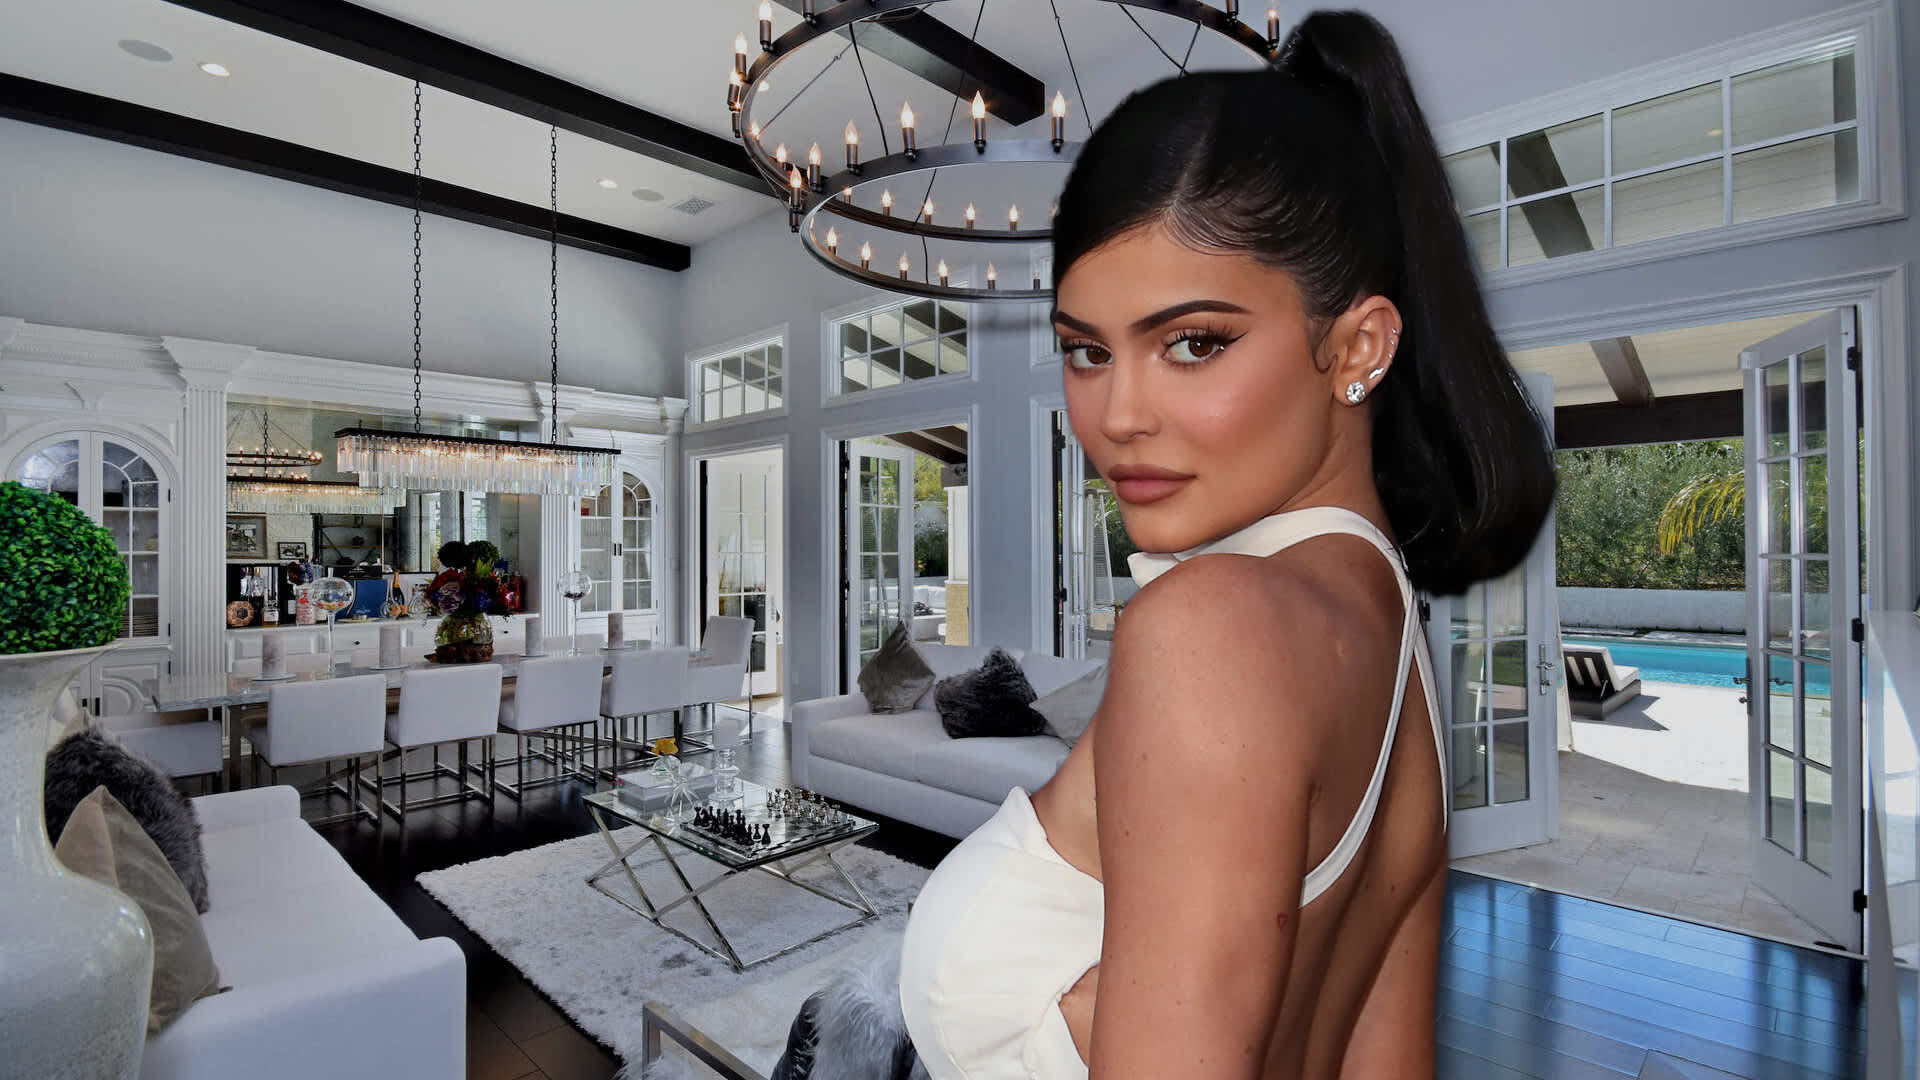 Kylie Jenner's former house is on the market for $ million